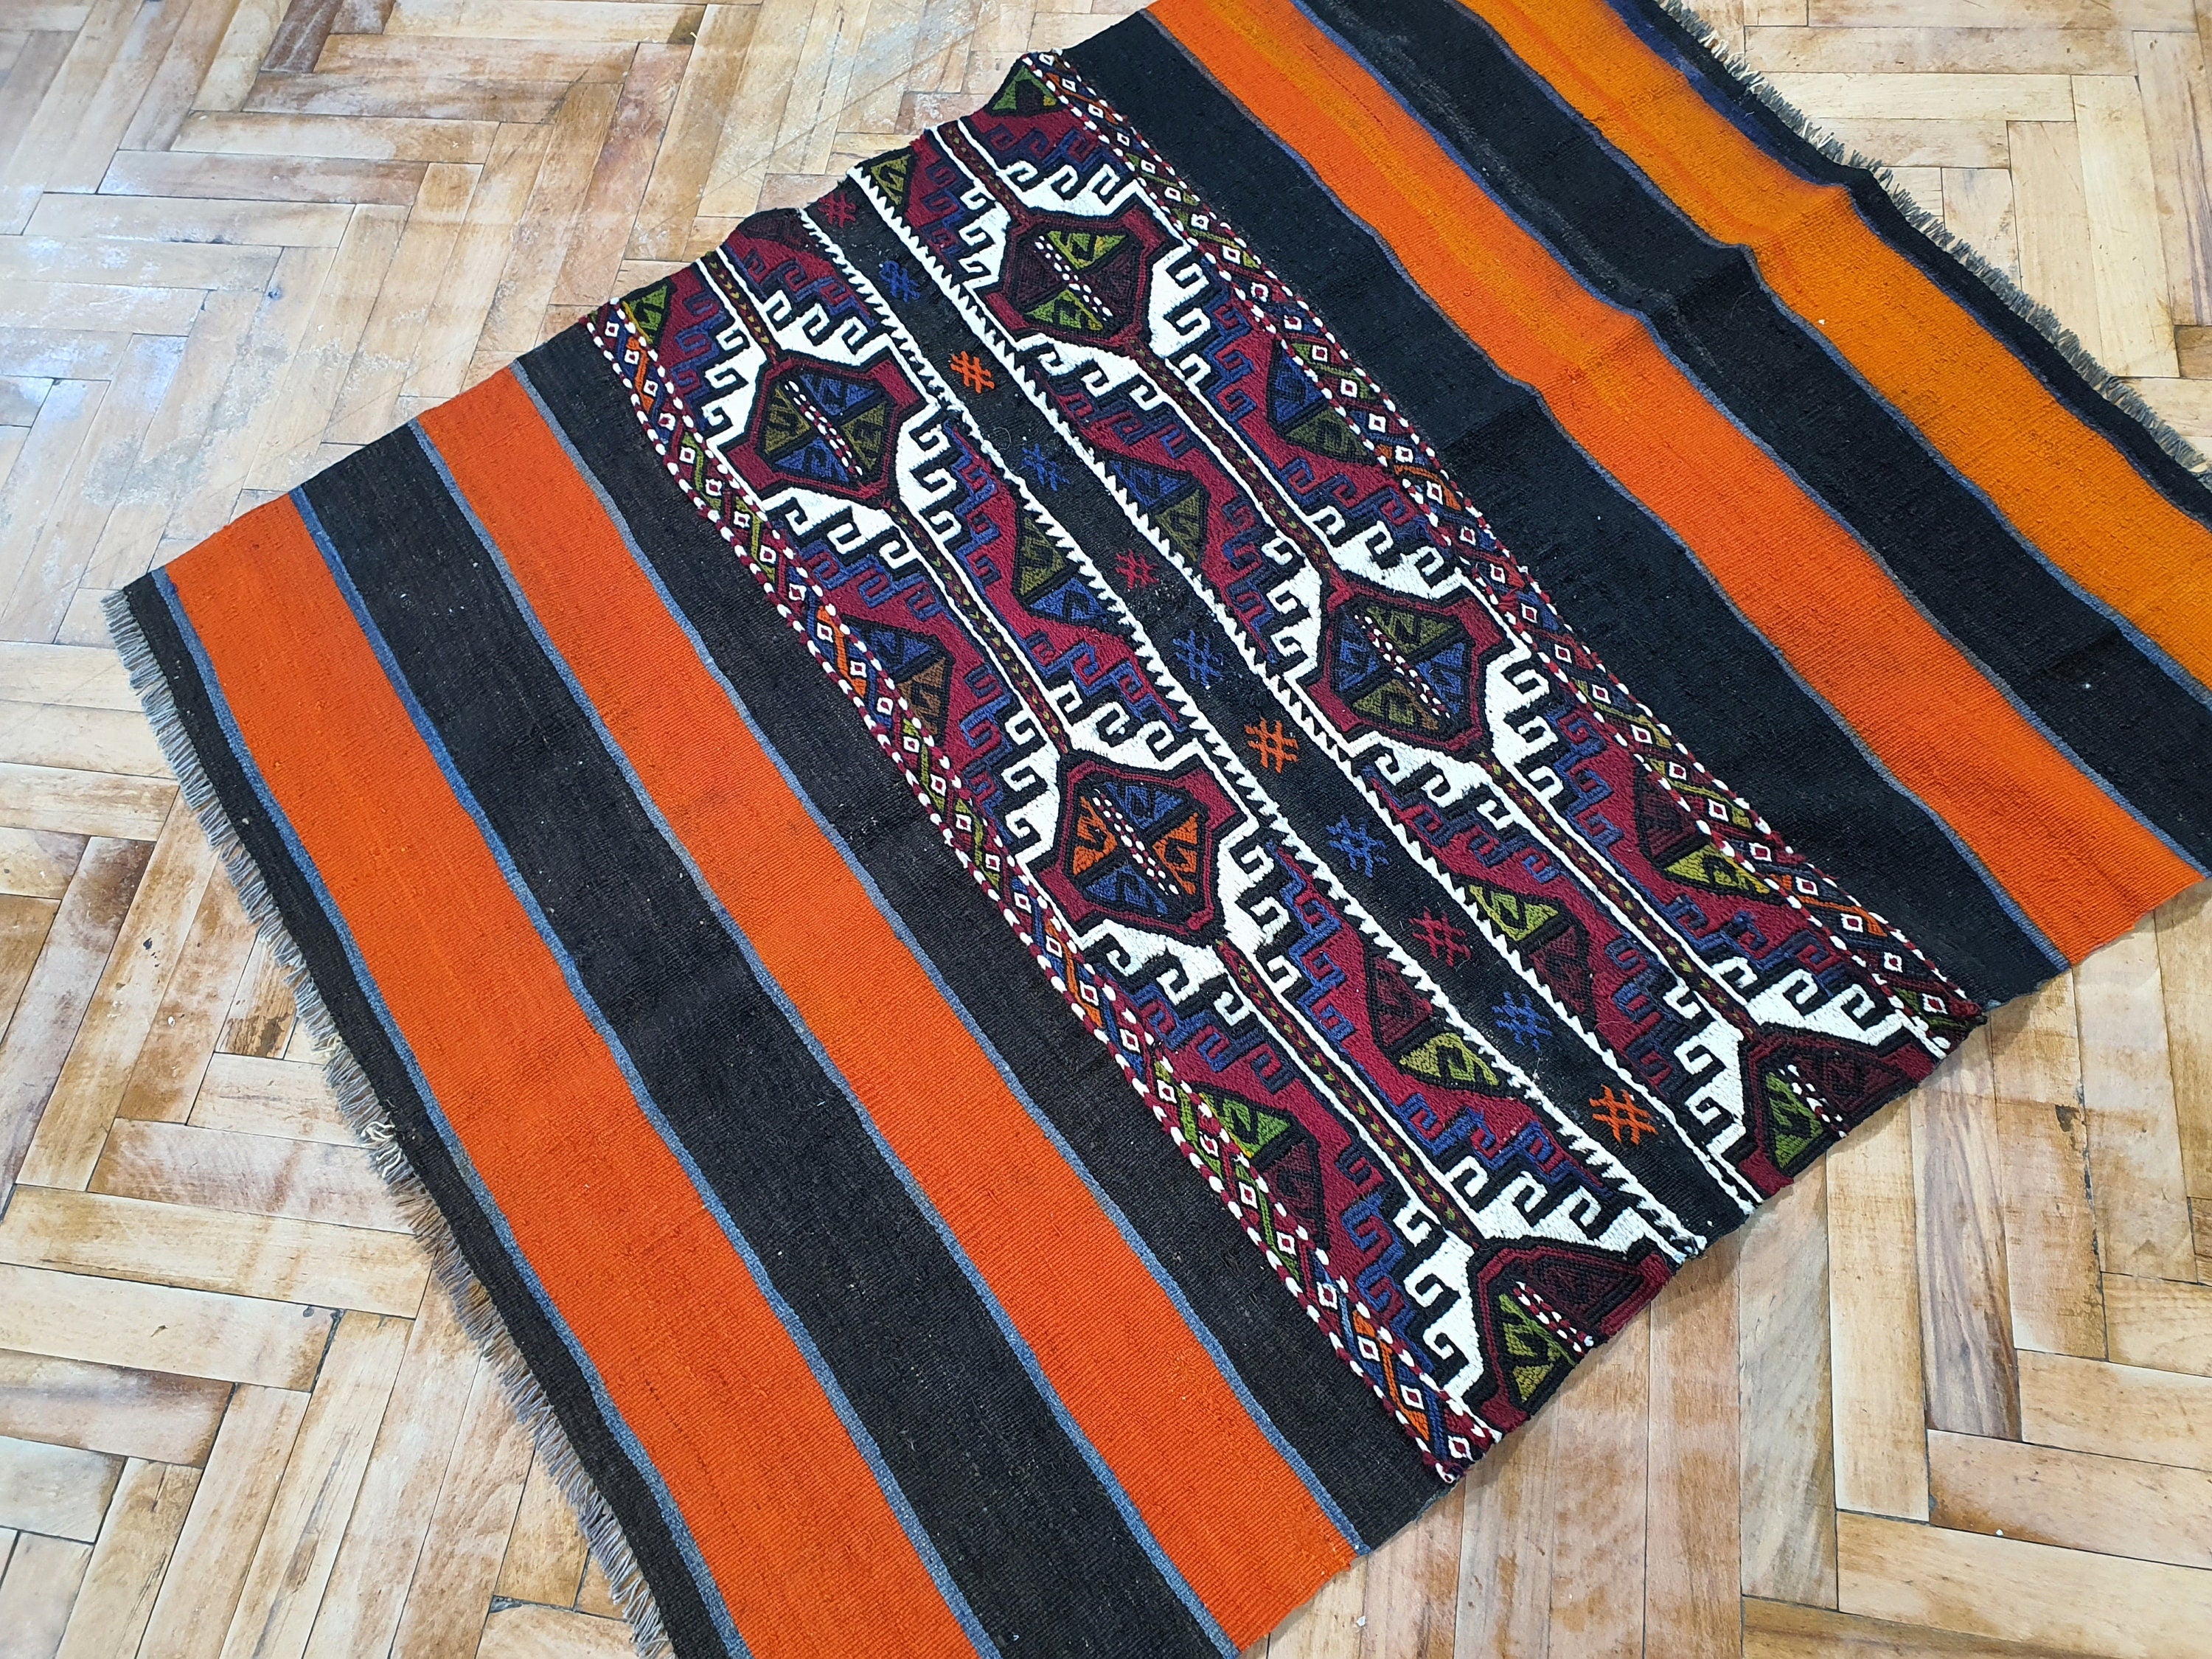 Turkish Kilim Rug, 4 ft 3 in x 3 ft 6 in,Terracotta and Brown Vintage Cicim Embroidered Kilim Rug